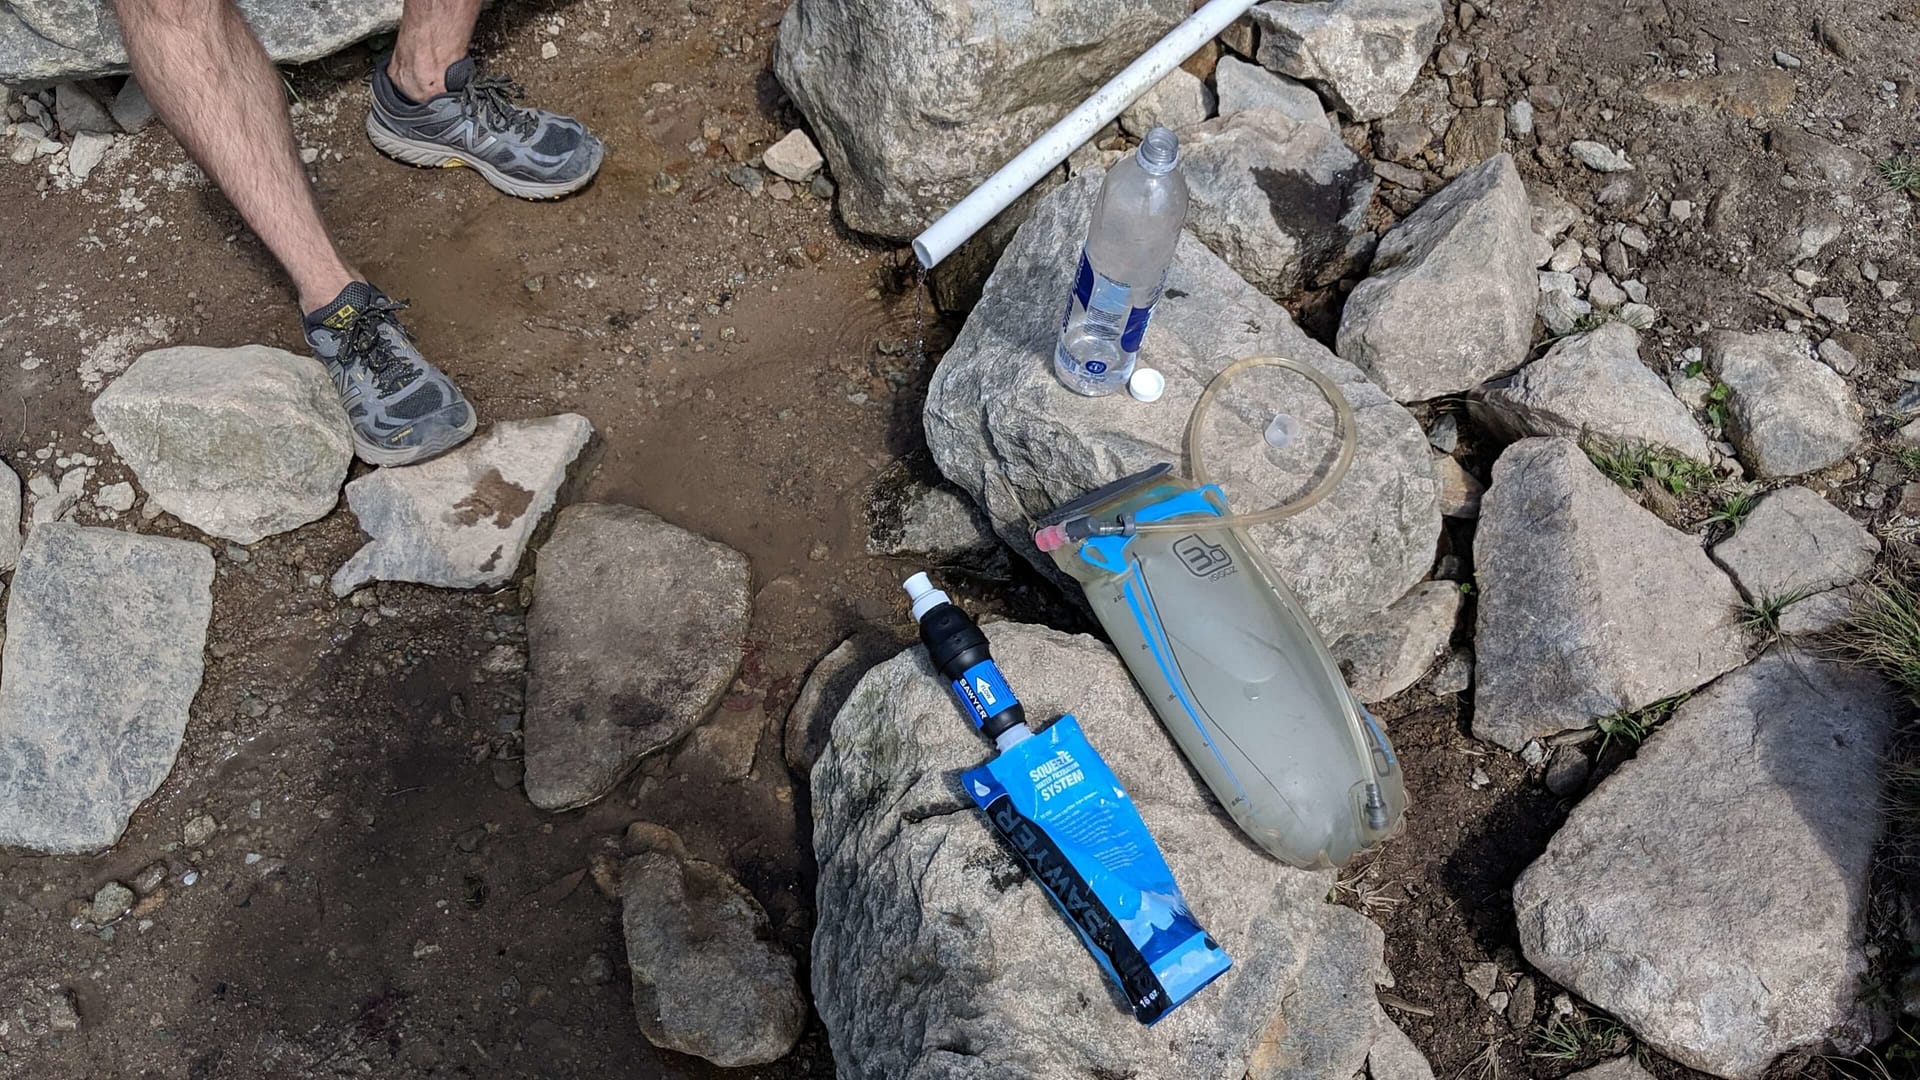 How Much Water to Take Hiking? Lots of water. Pictured here is a hydration reservoir and sawyer squeeze filter